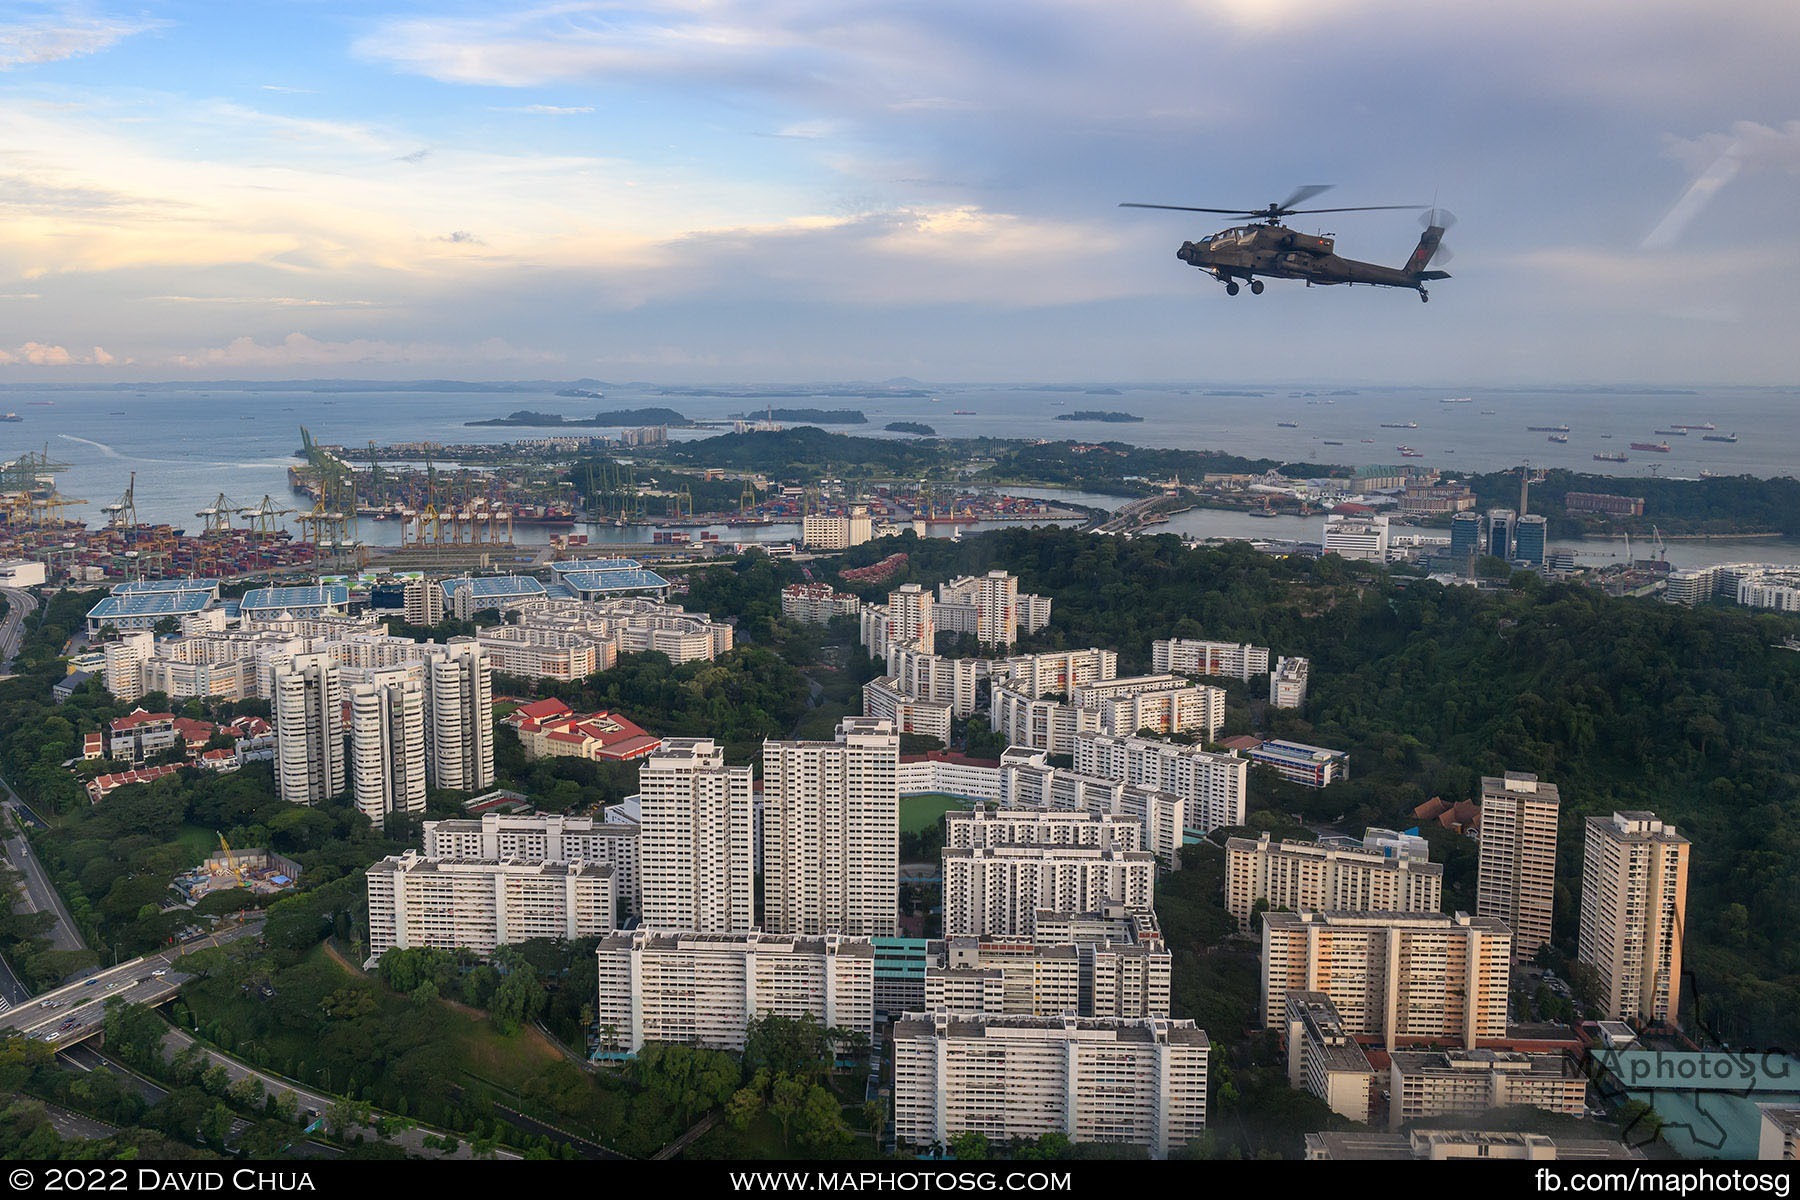 View from Chinook flying the state flag as it passes by the Telok Blangah estate